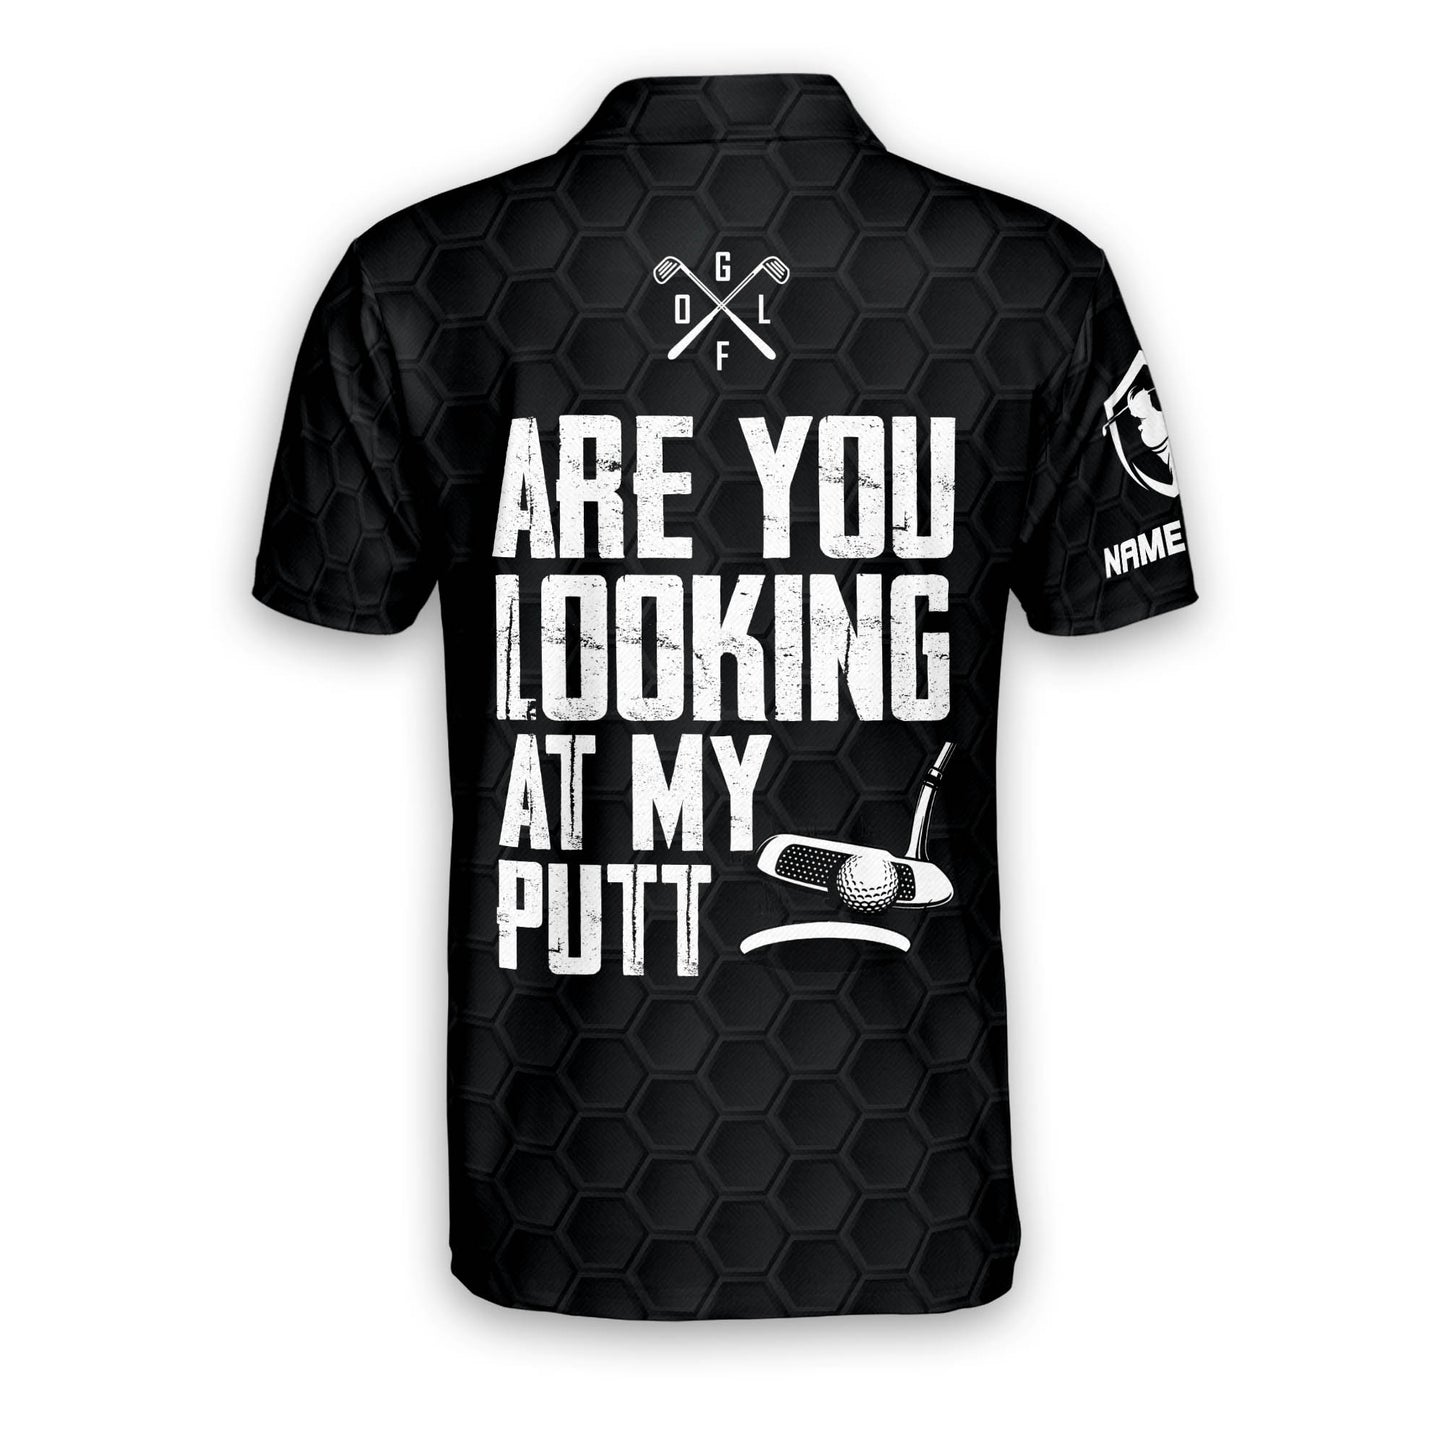 Are You Looking at My Putt Golf Polo Shirt GM0033